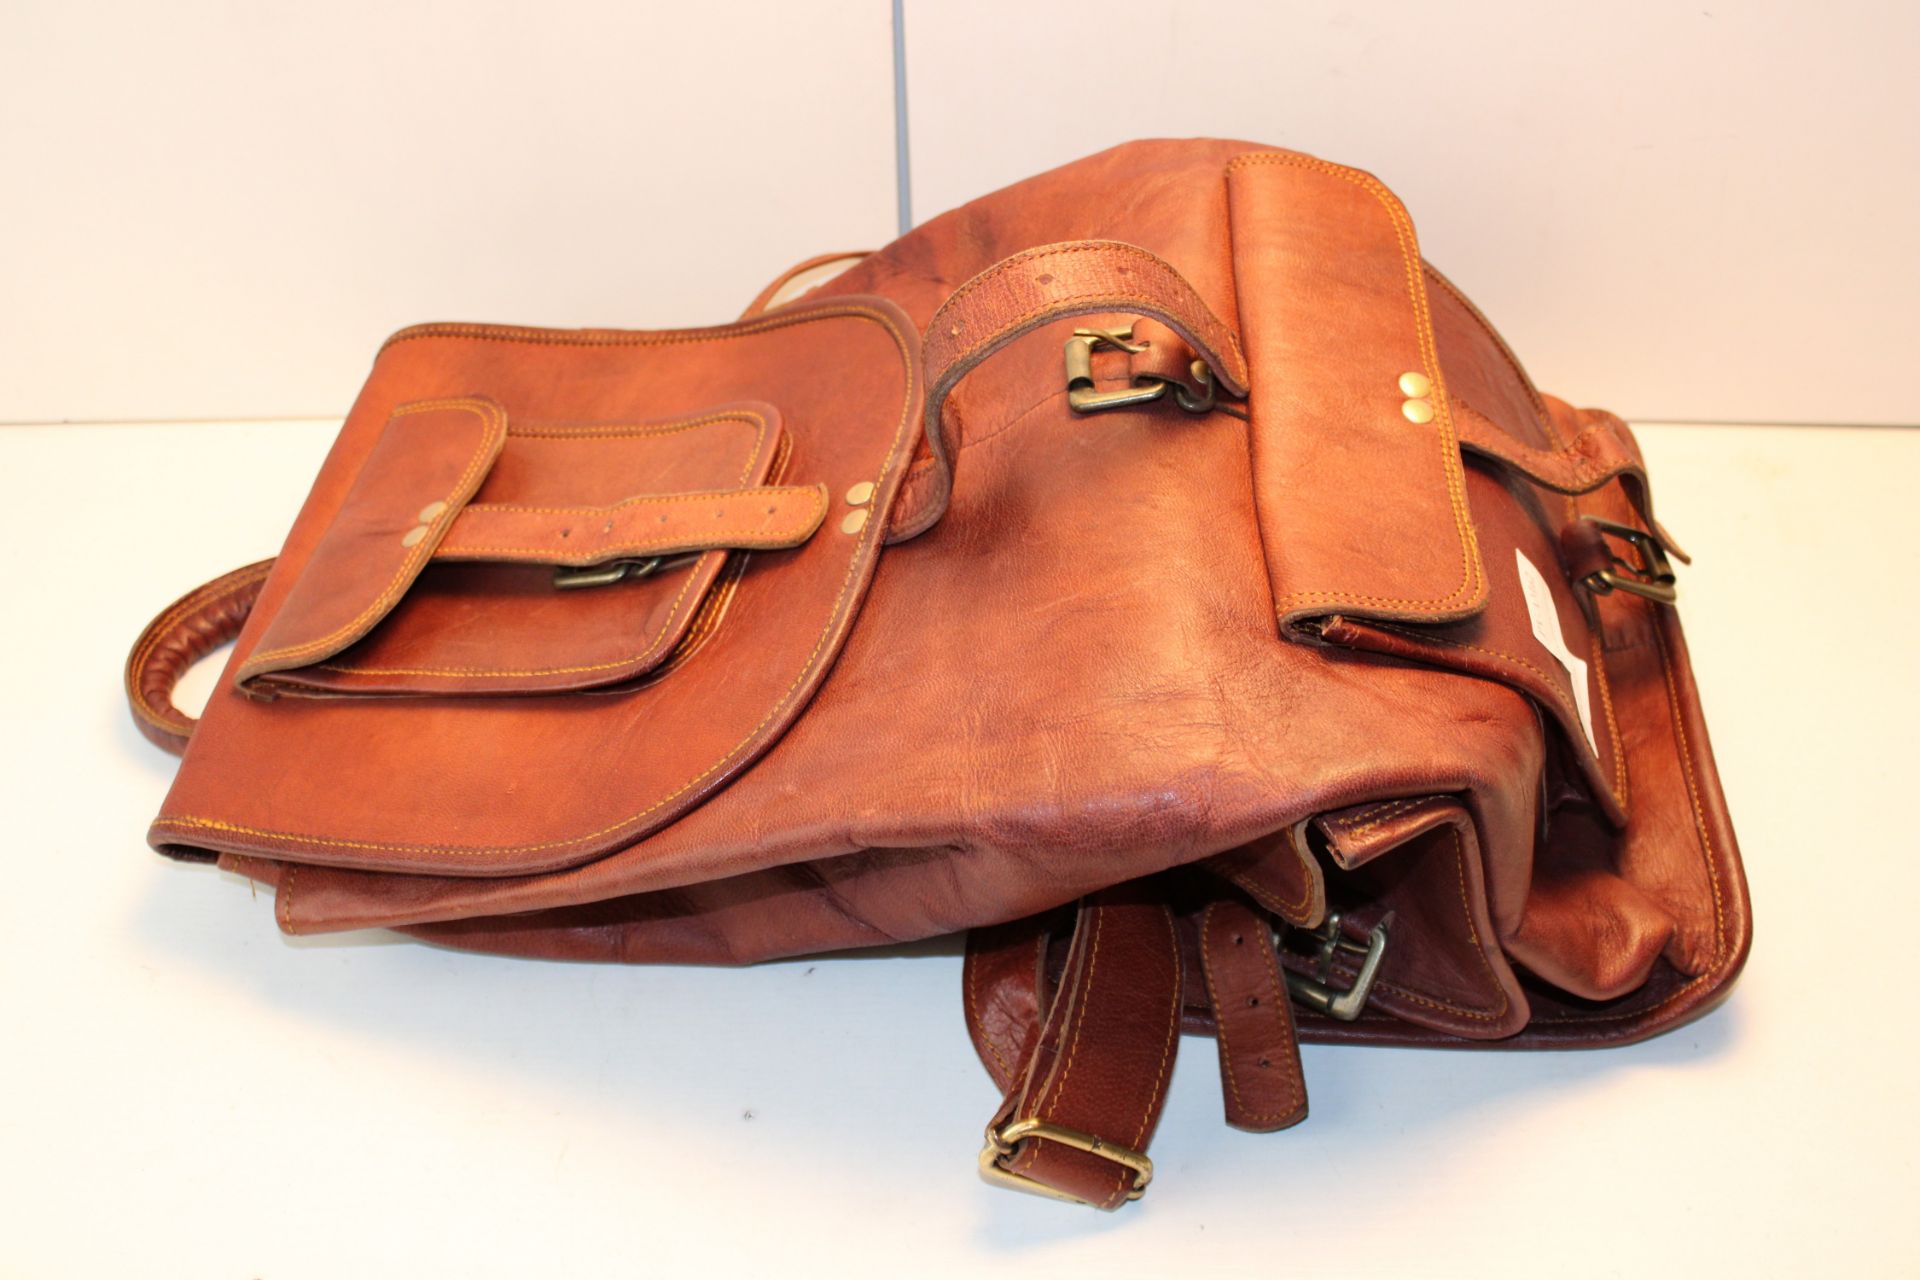 LEATHER BAG Condition ReportAppraisal Available on Request- All Items are Unchecked/Untested Raw